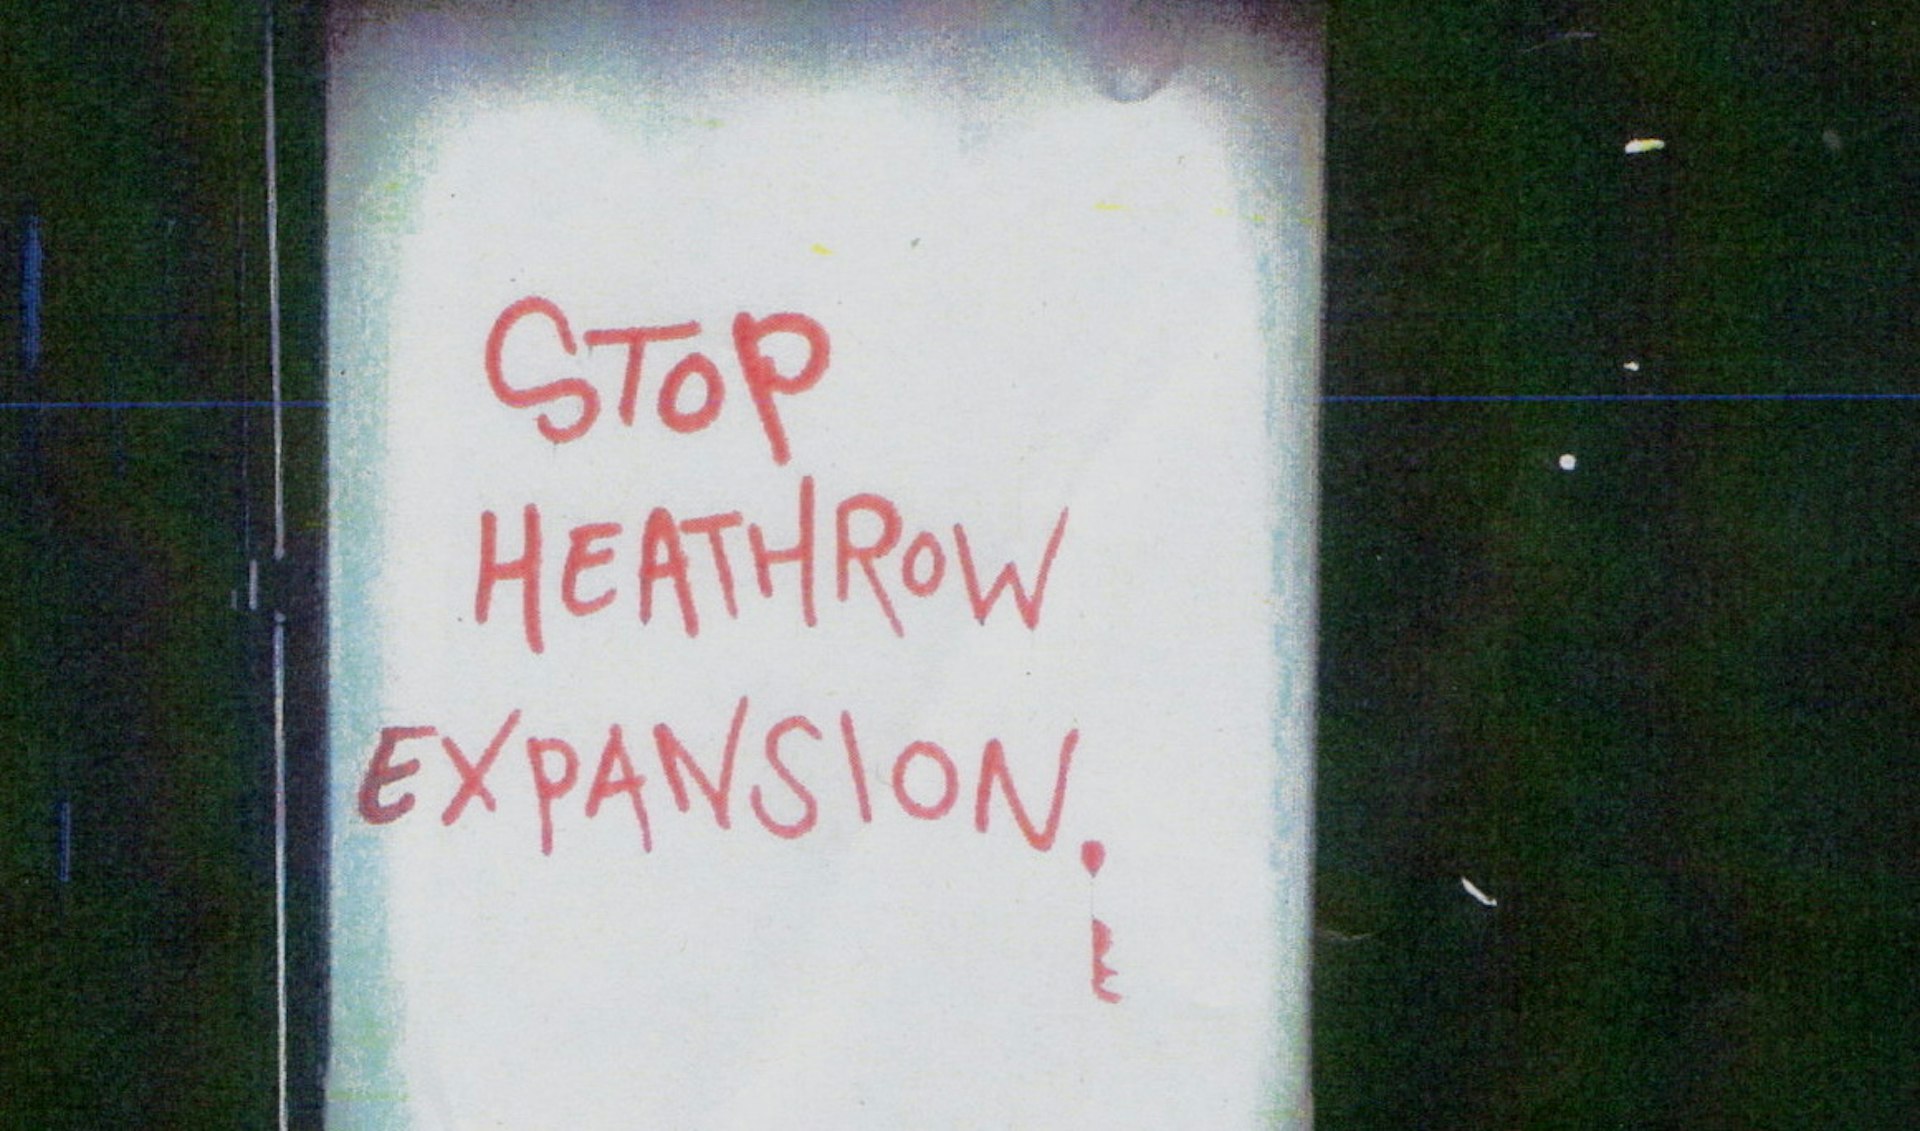 Heathrow’s expansion spells disaster for politics & the planet